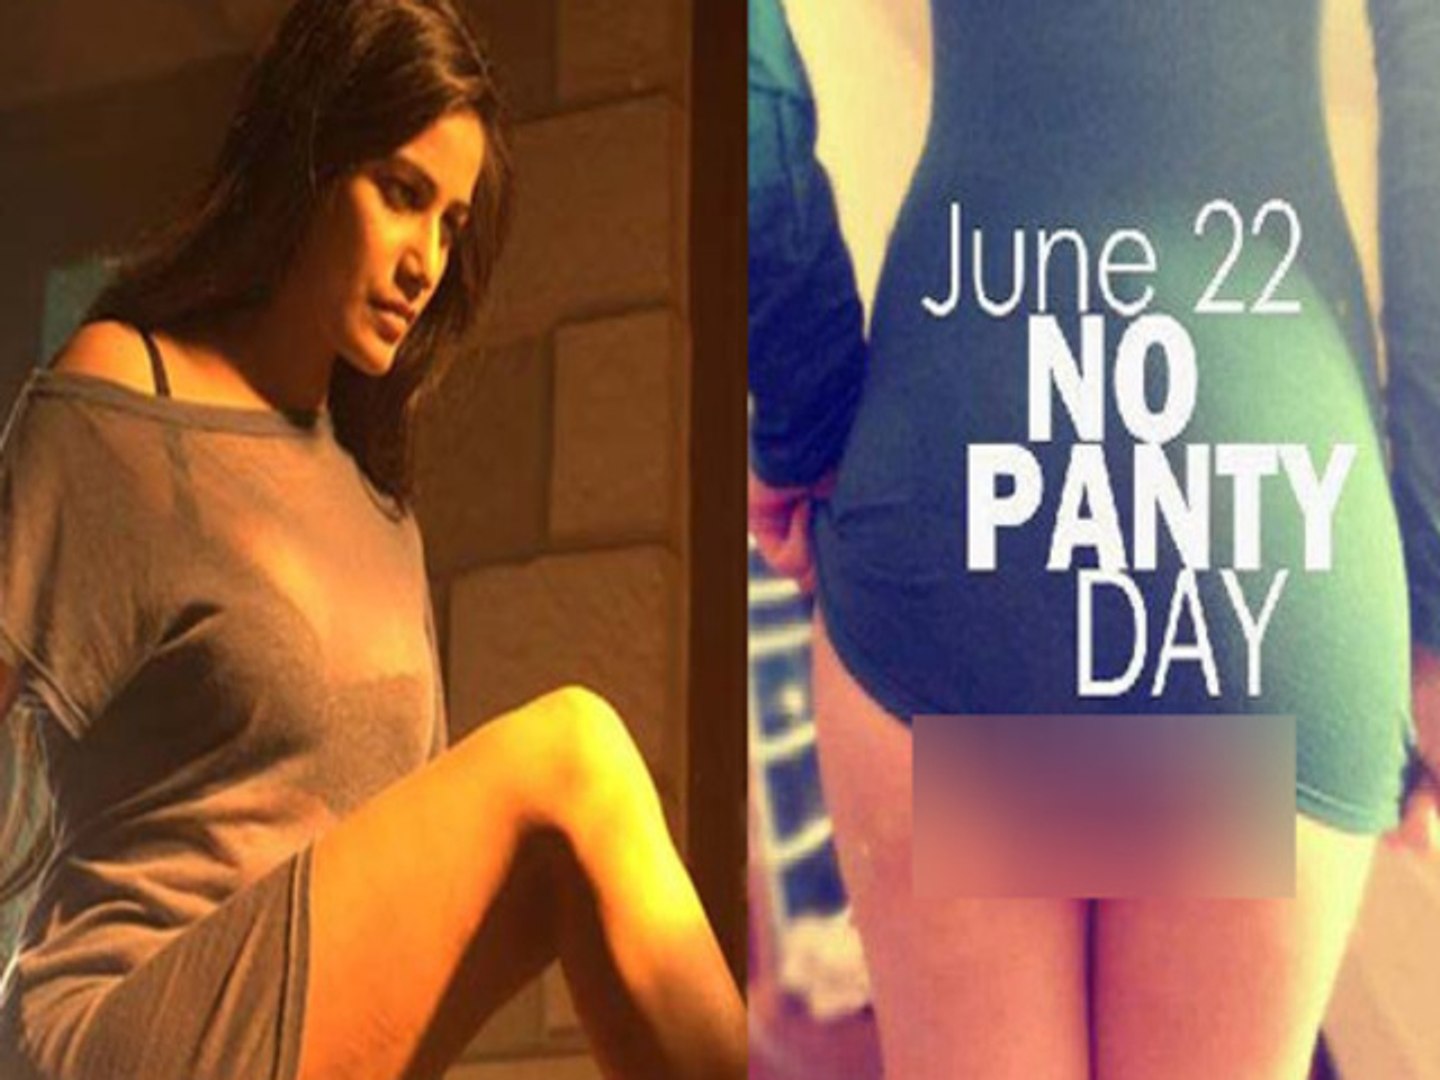 chris mclallen recommends no panty day pics pic